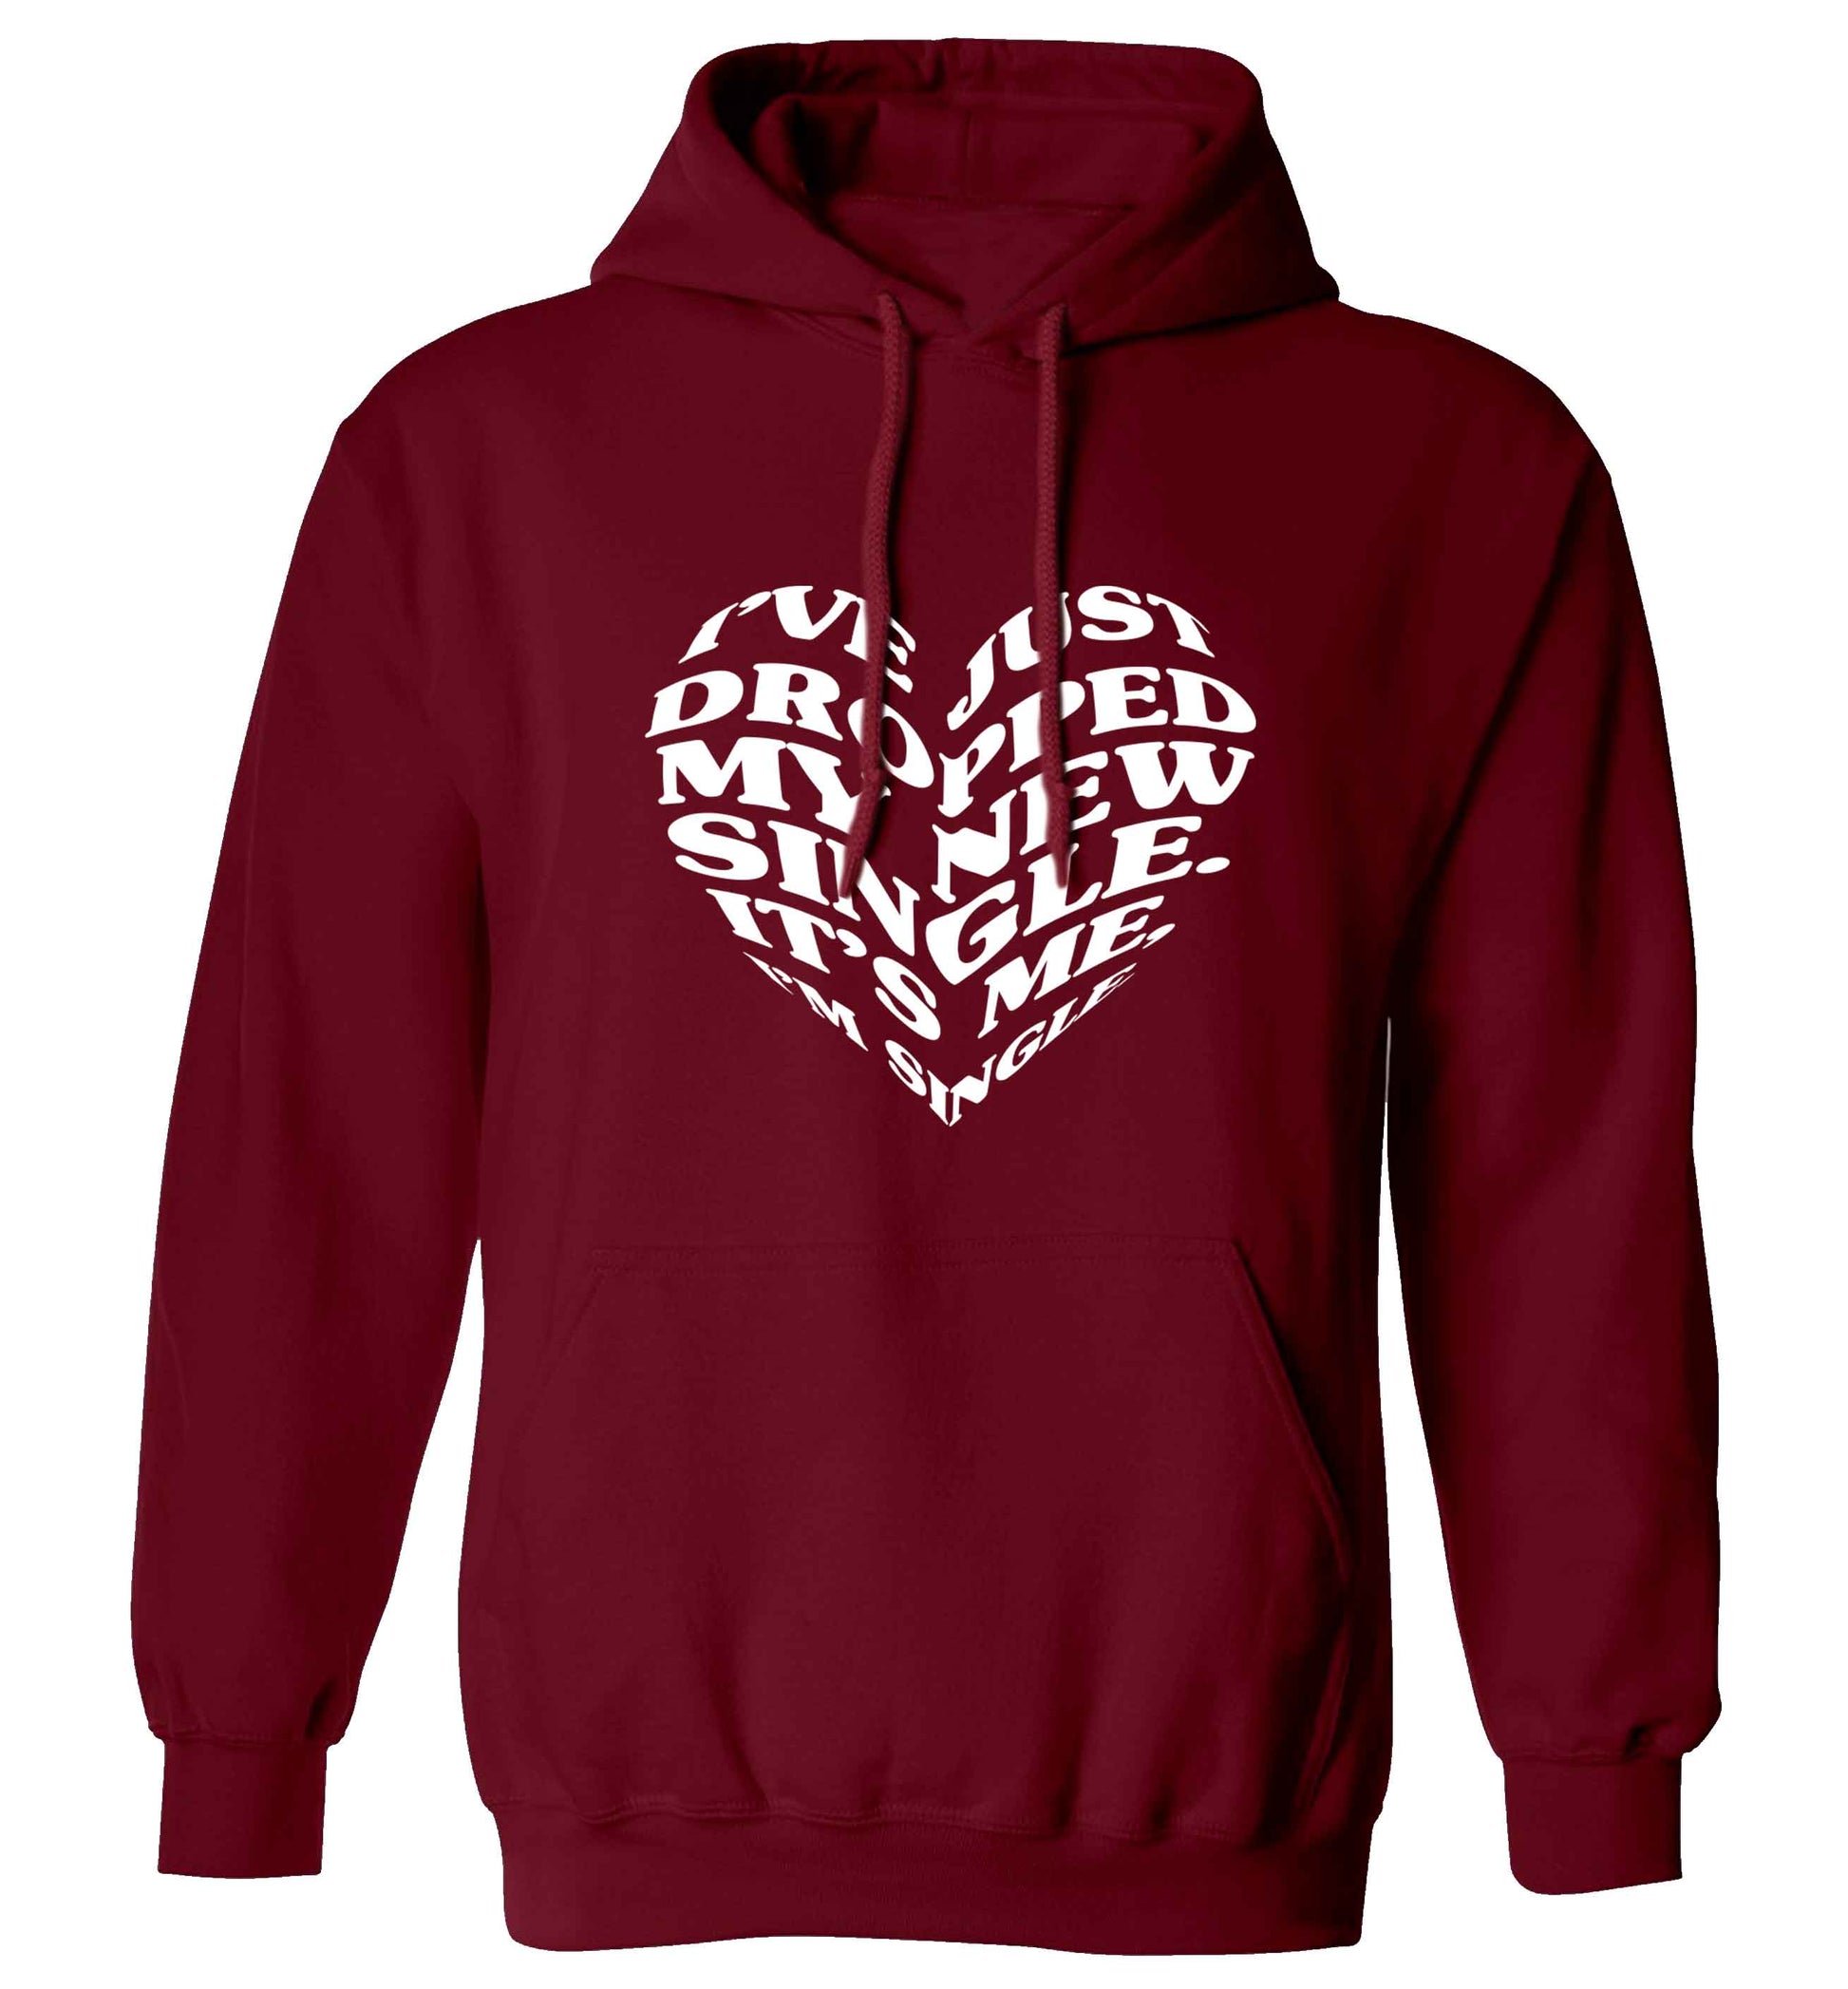 I've just dropped my new single it's me I'm single adults unisex maroon hoodie 2XL